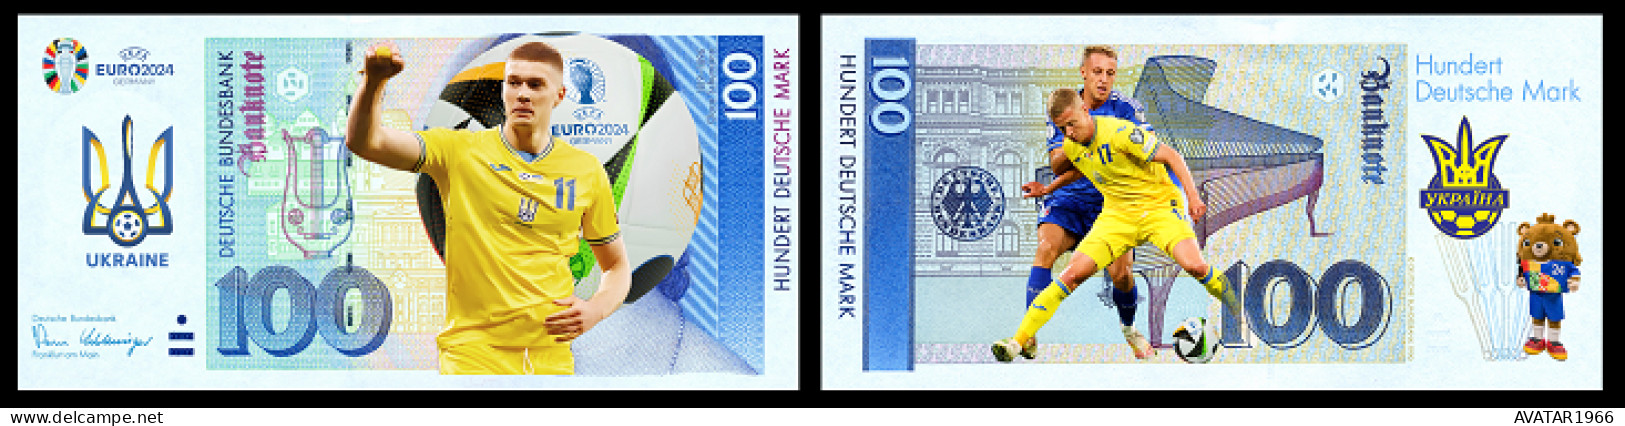 UEFA European Football Championship 2024 qualified country Ukraine 8 pieces Germany fantasy paper money